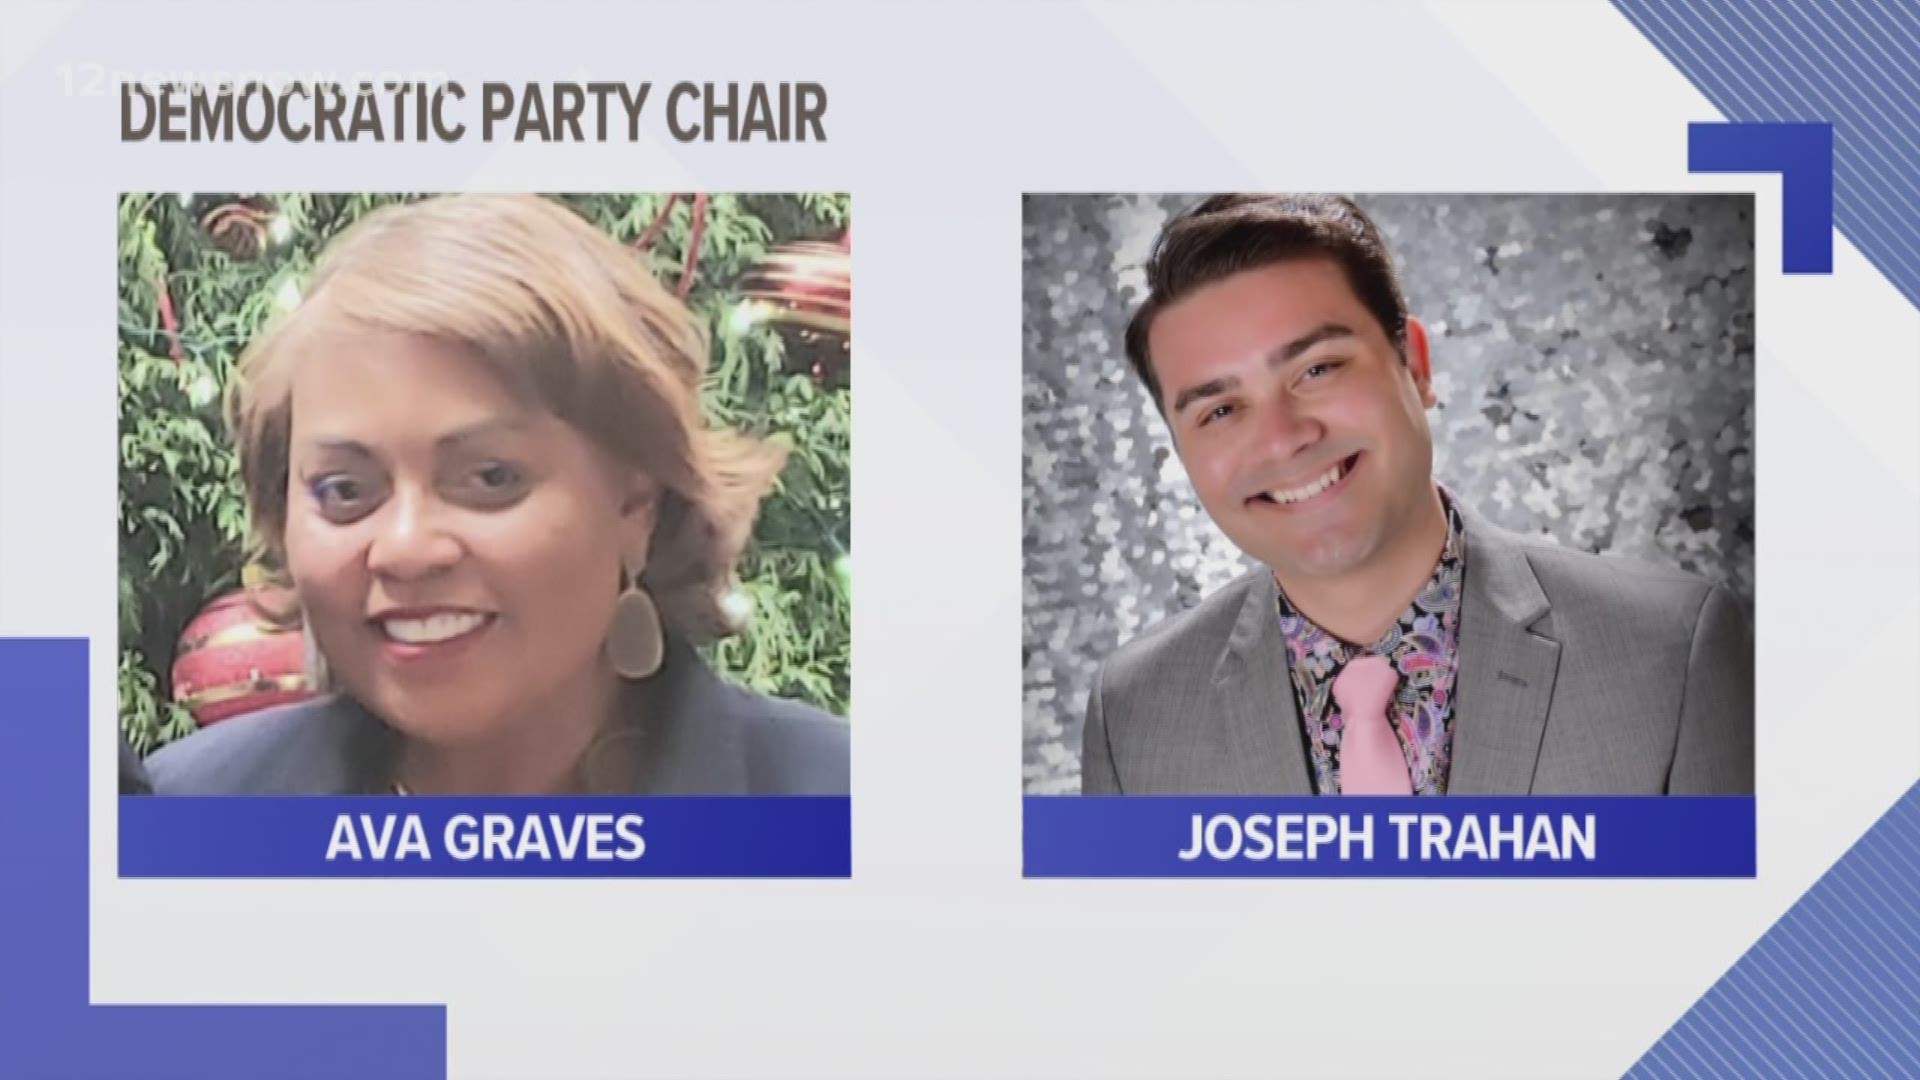 Joseph Trahan and Ava Graves have announced they'll run for the seat